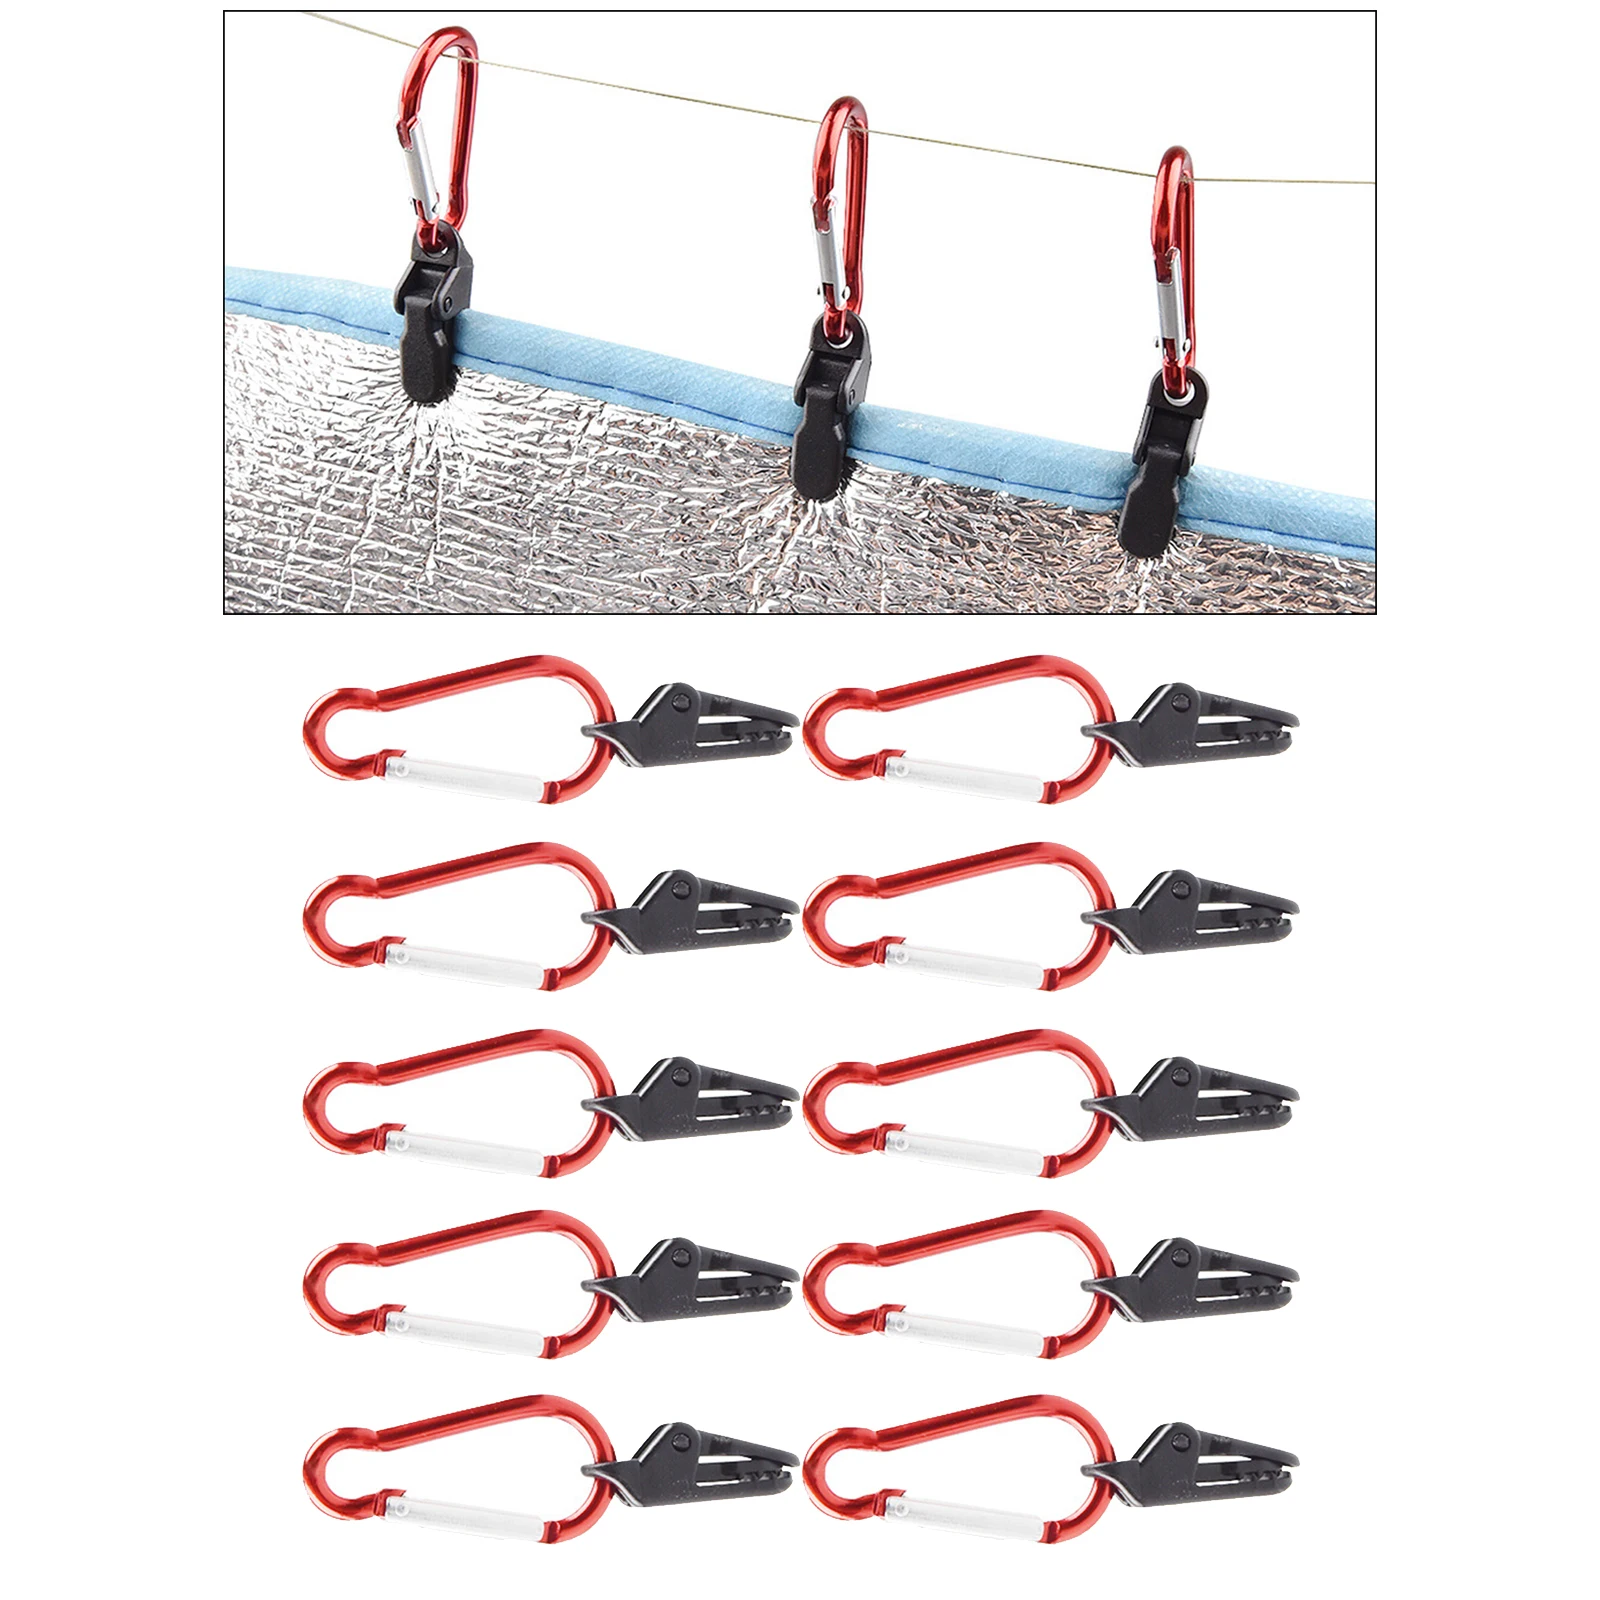 10x Tent Tarp Clips Canopies Clamps Camping Canopy Carabiner Awnings Clip